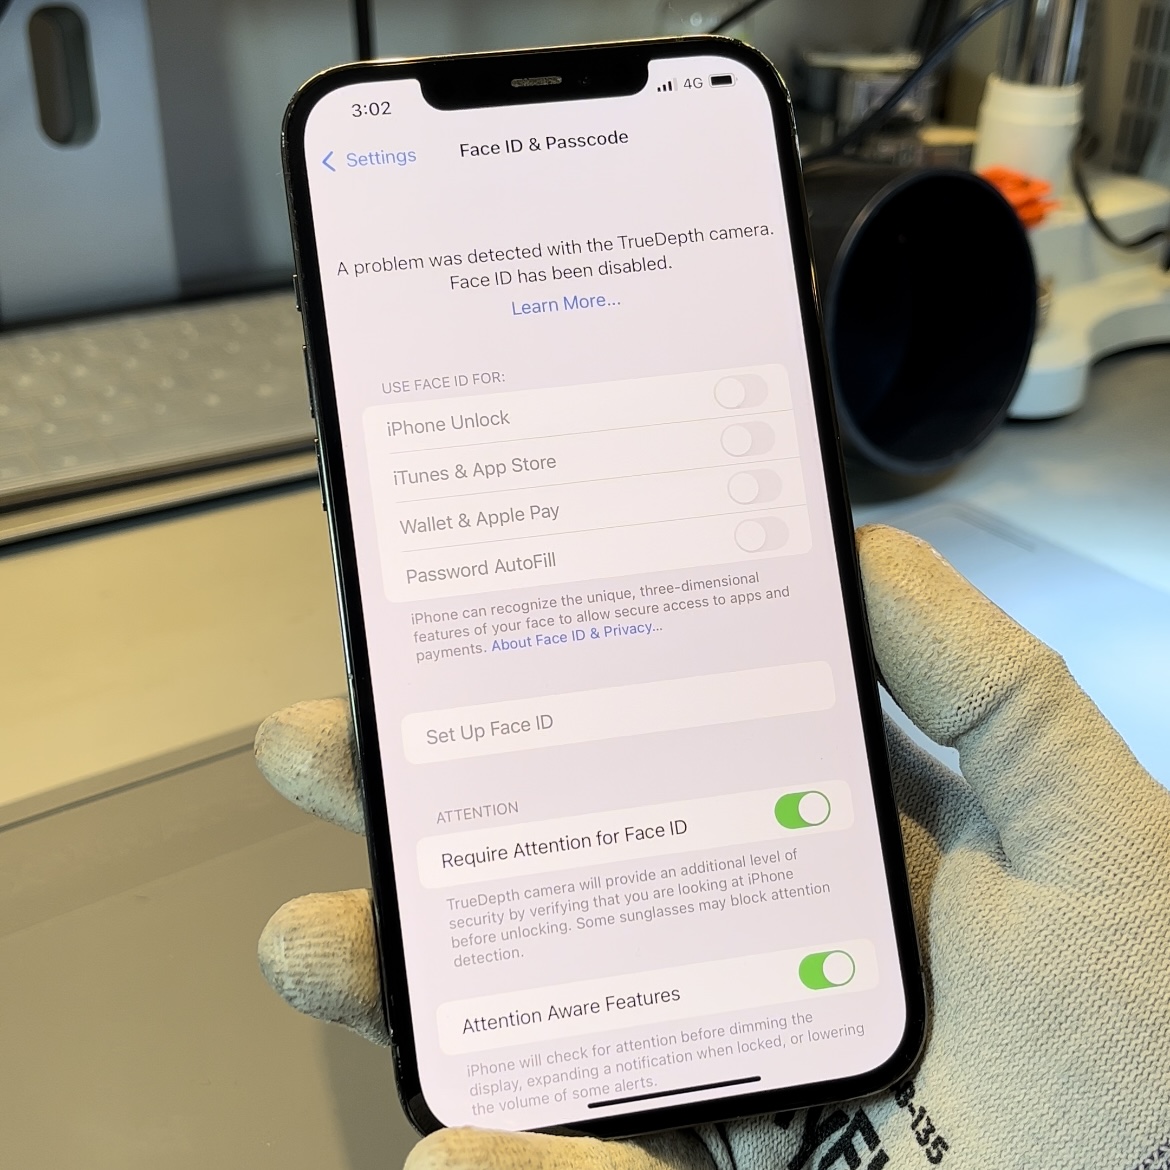 iPhone Face ID not working? Try these tips from our repair experts